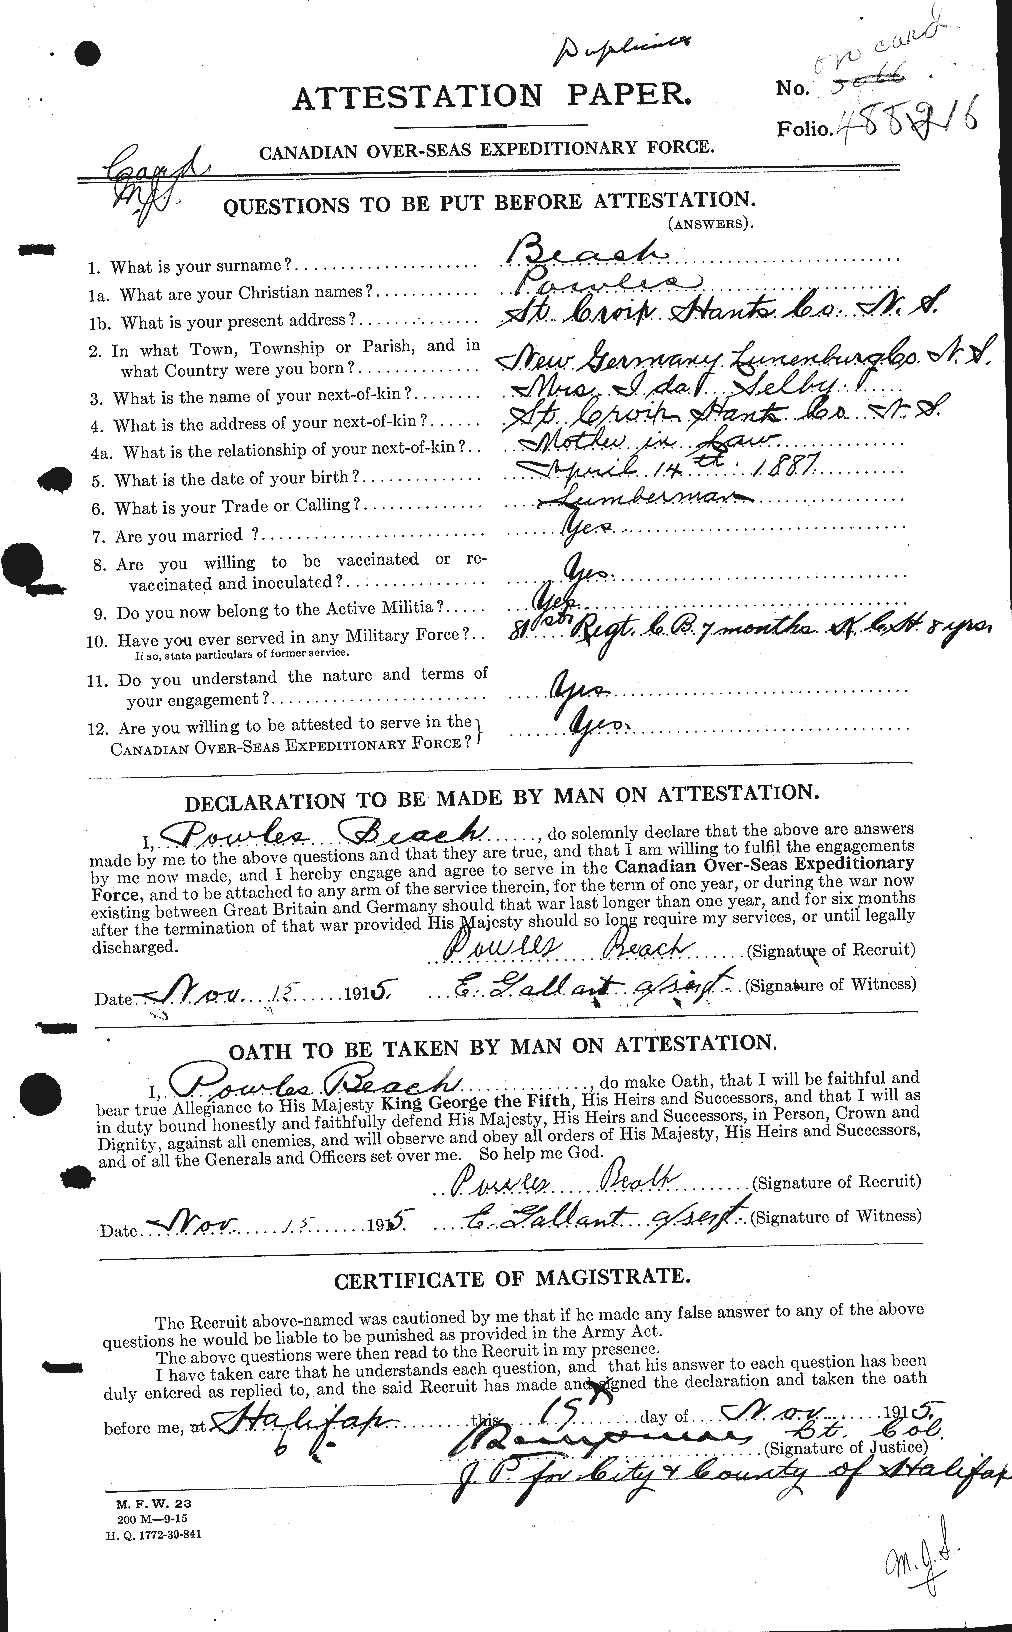 Personnel Records of the First World War - CEF 235135a